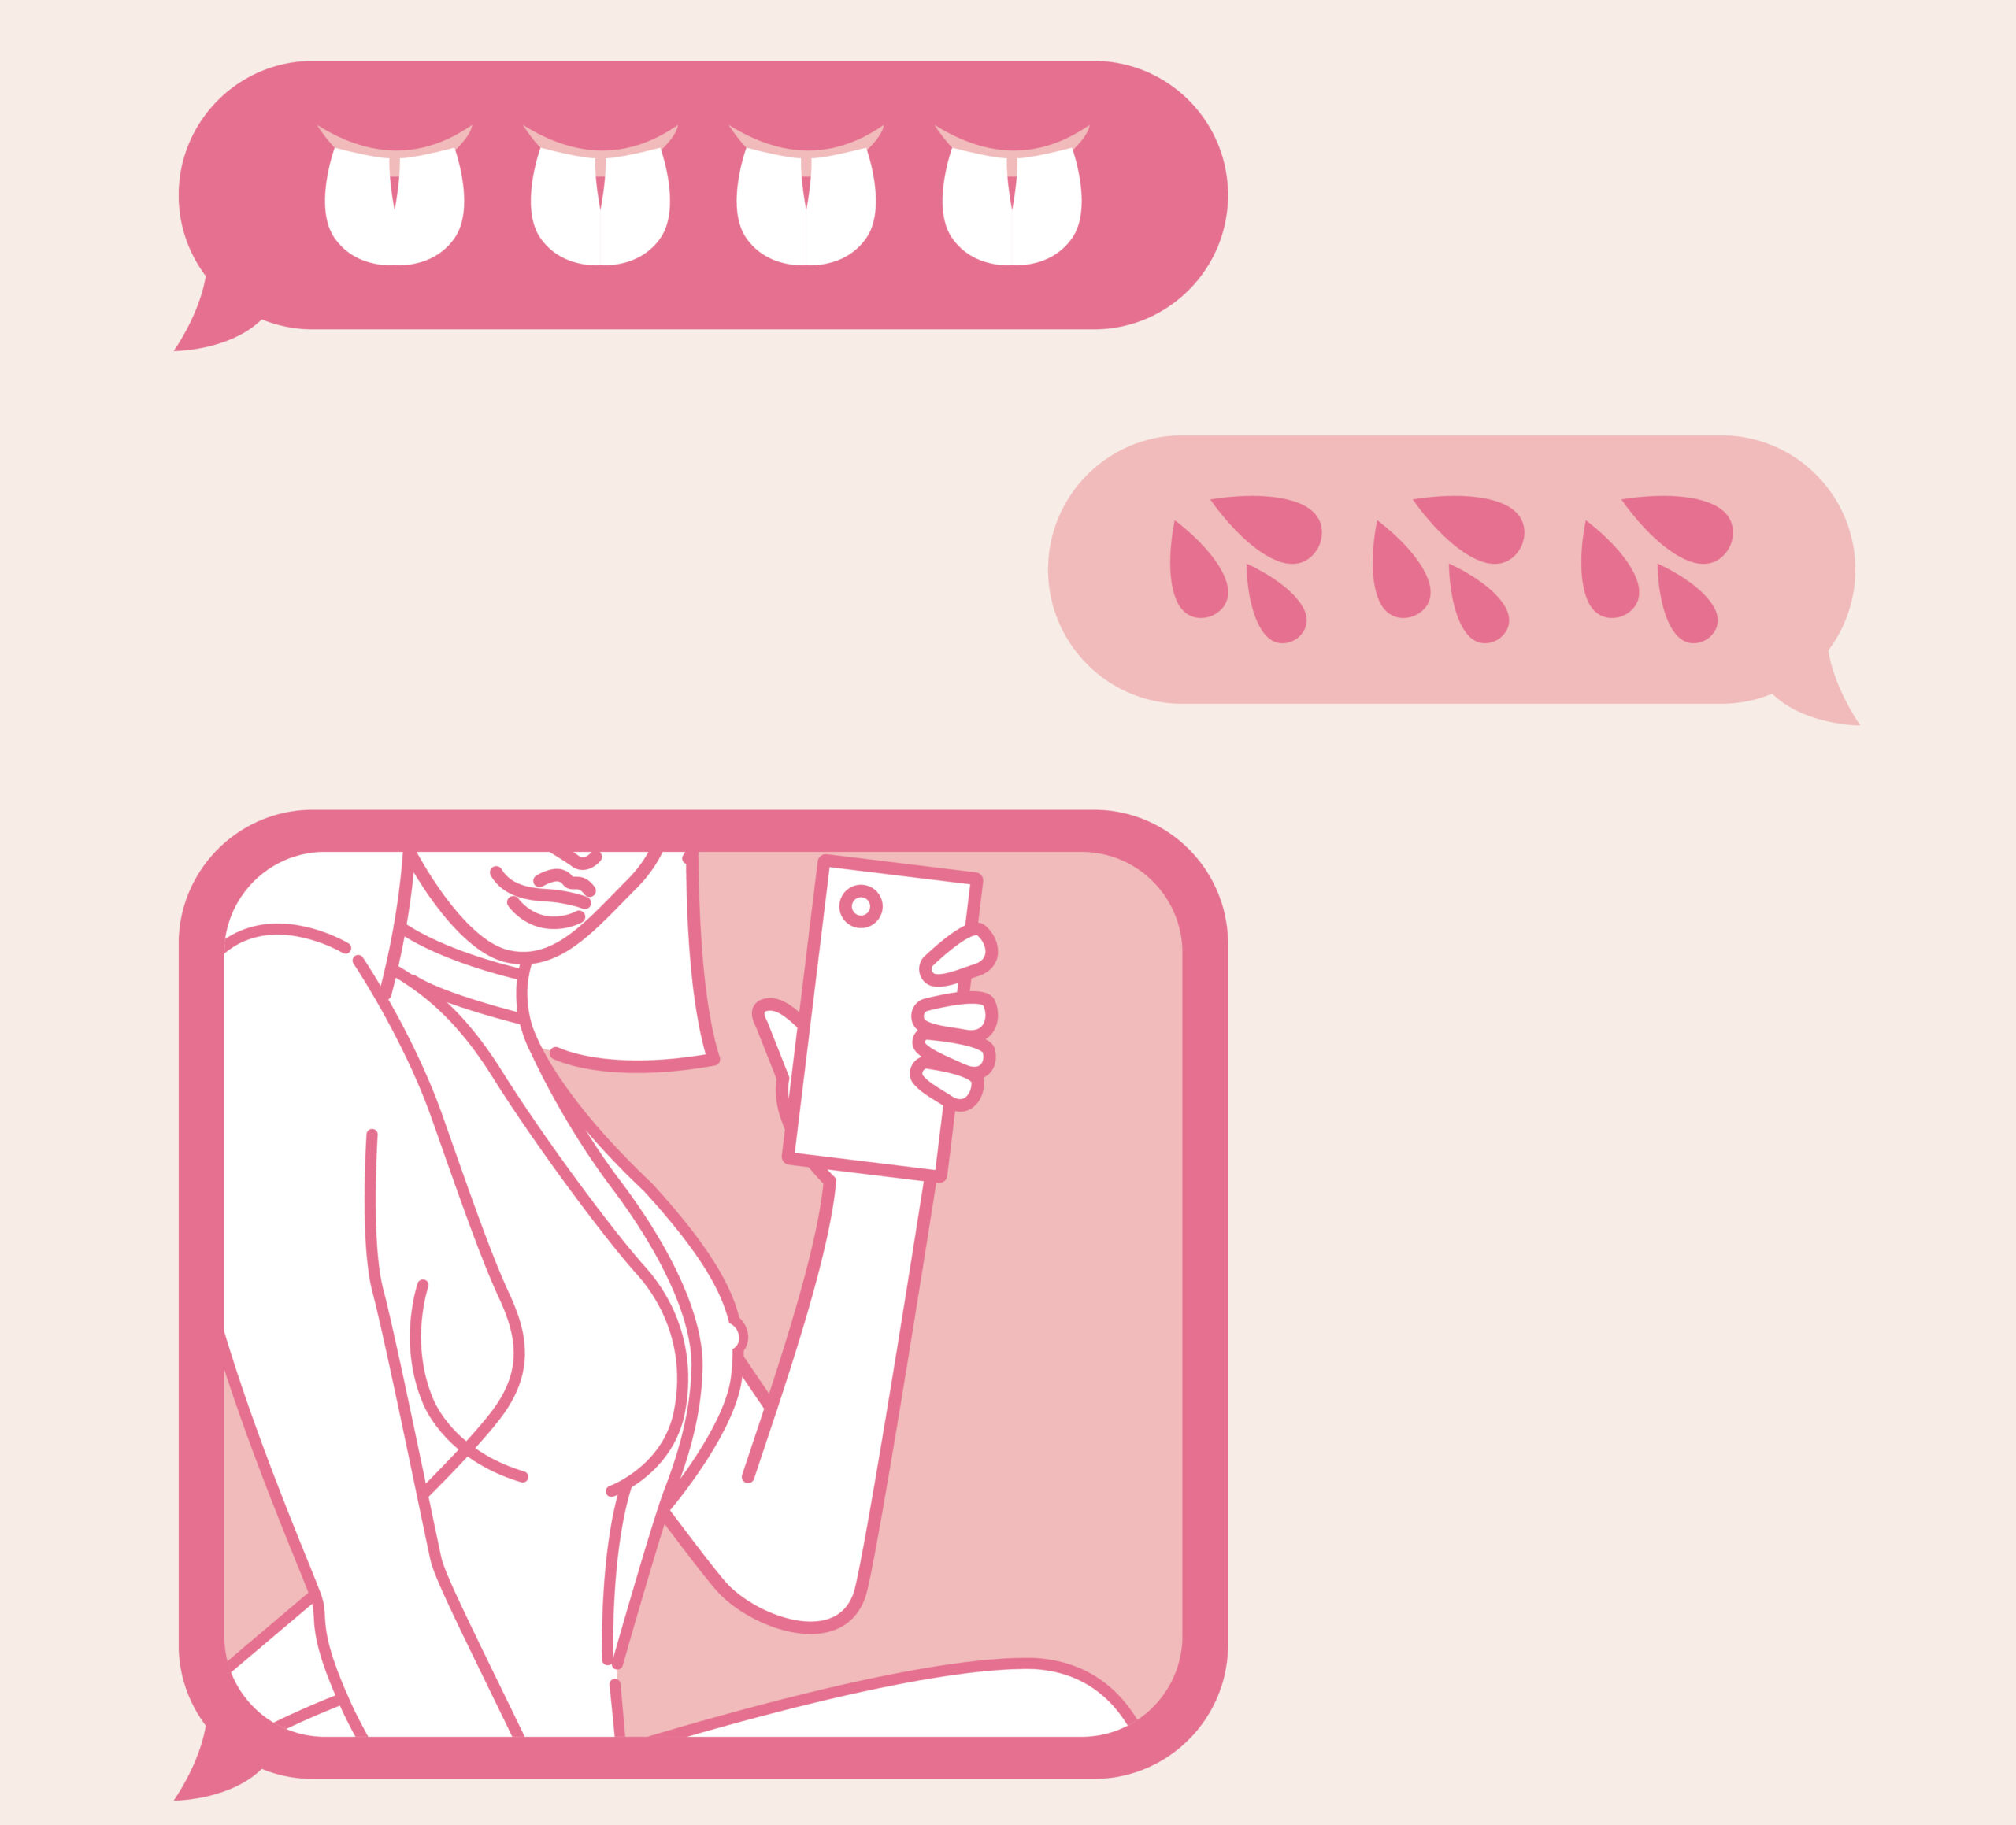 Digital Intimacy: Keeping Safe When Sexting